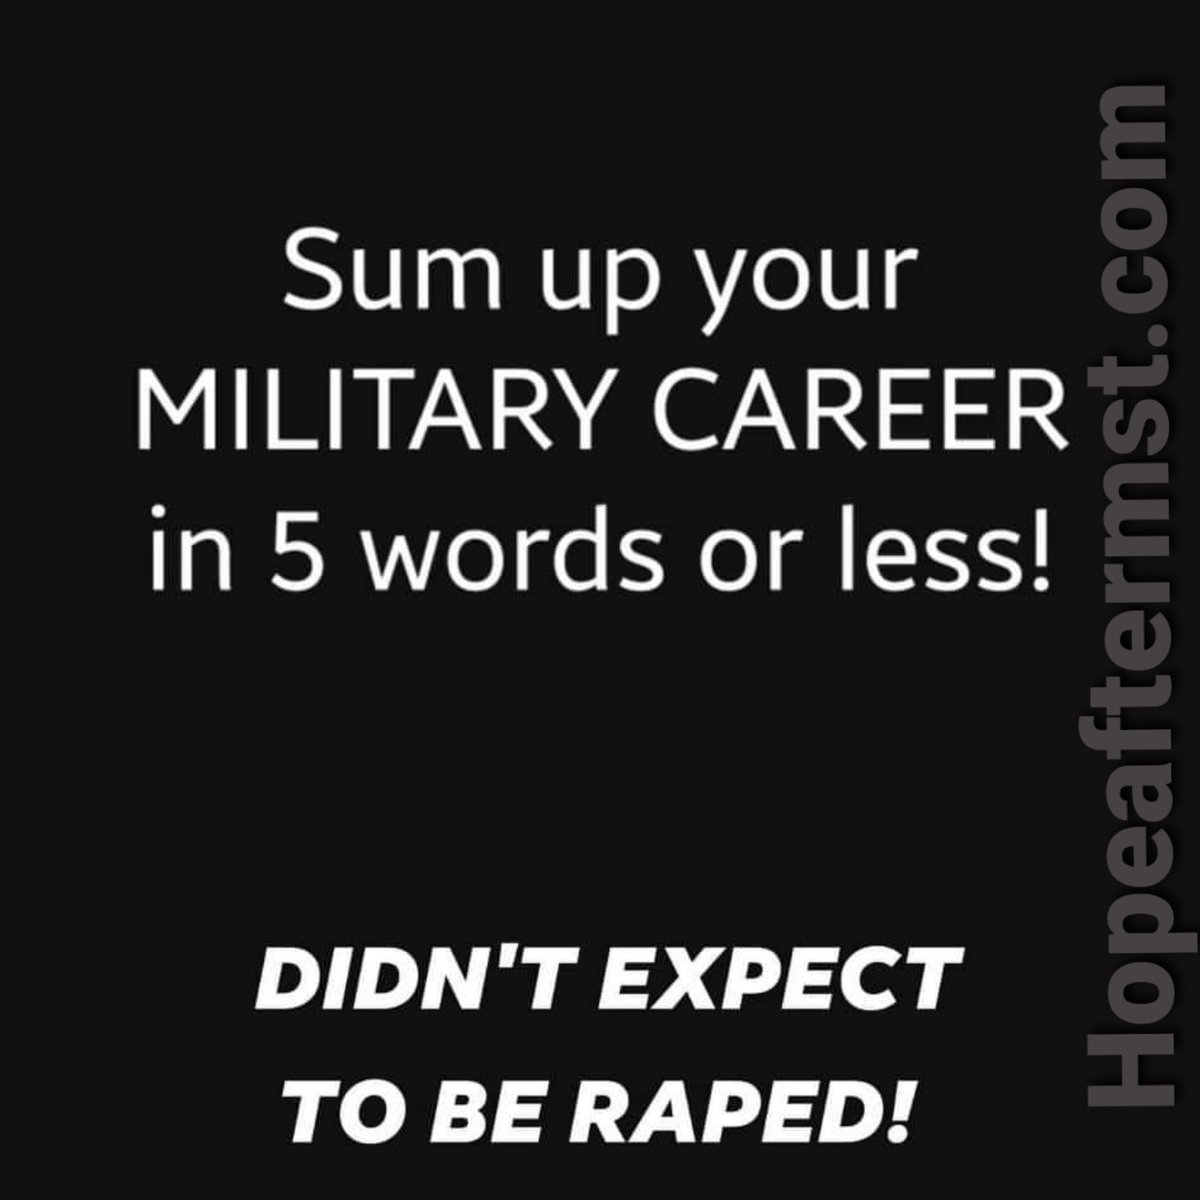 @debbieksl I am.. But will he keep his campaign promise to fight military sexual trauma.
Currently working with state reps with resolution to condemn military sexual assault and harassment. This session! 
#speaktoasurvivor #stopmilitarysexualtrauma Hopeaftermst.com